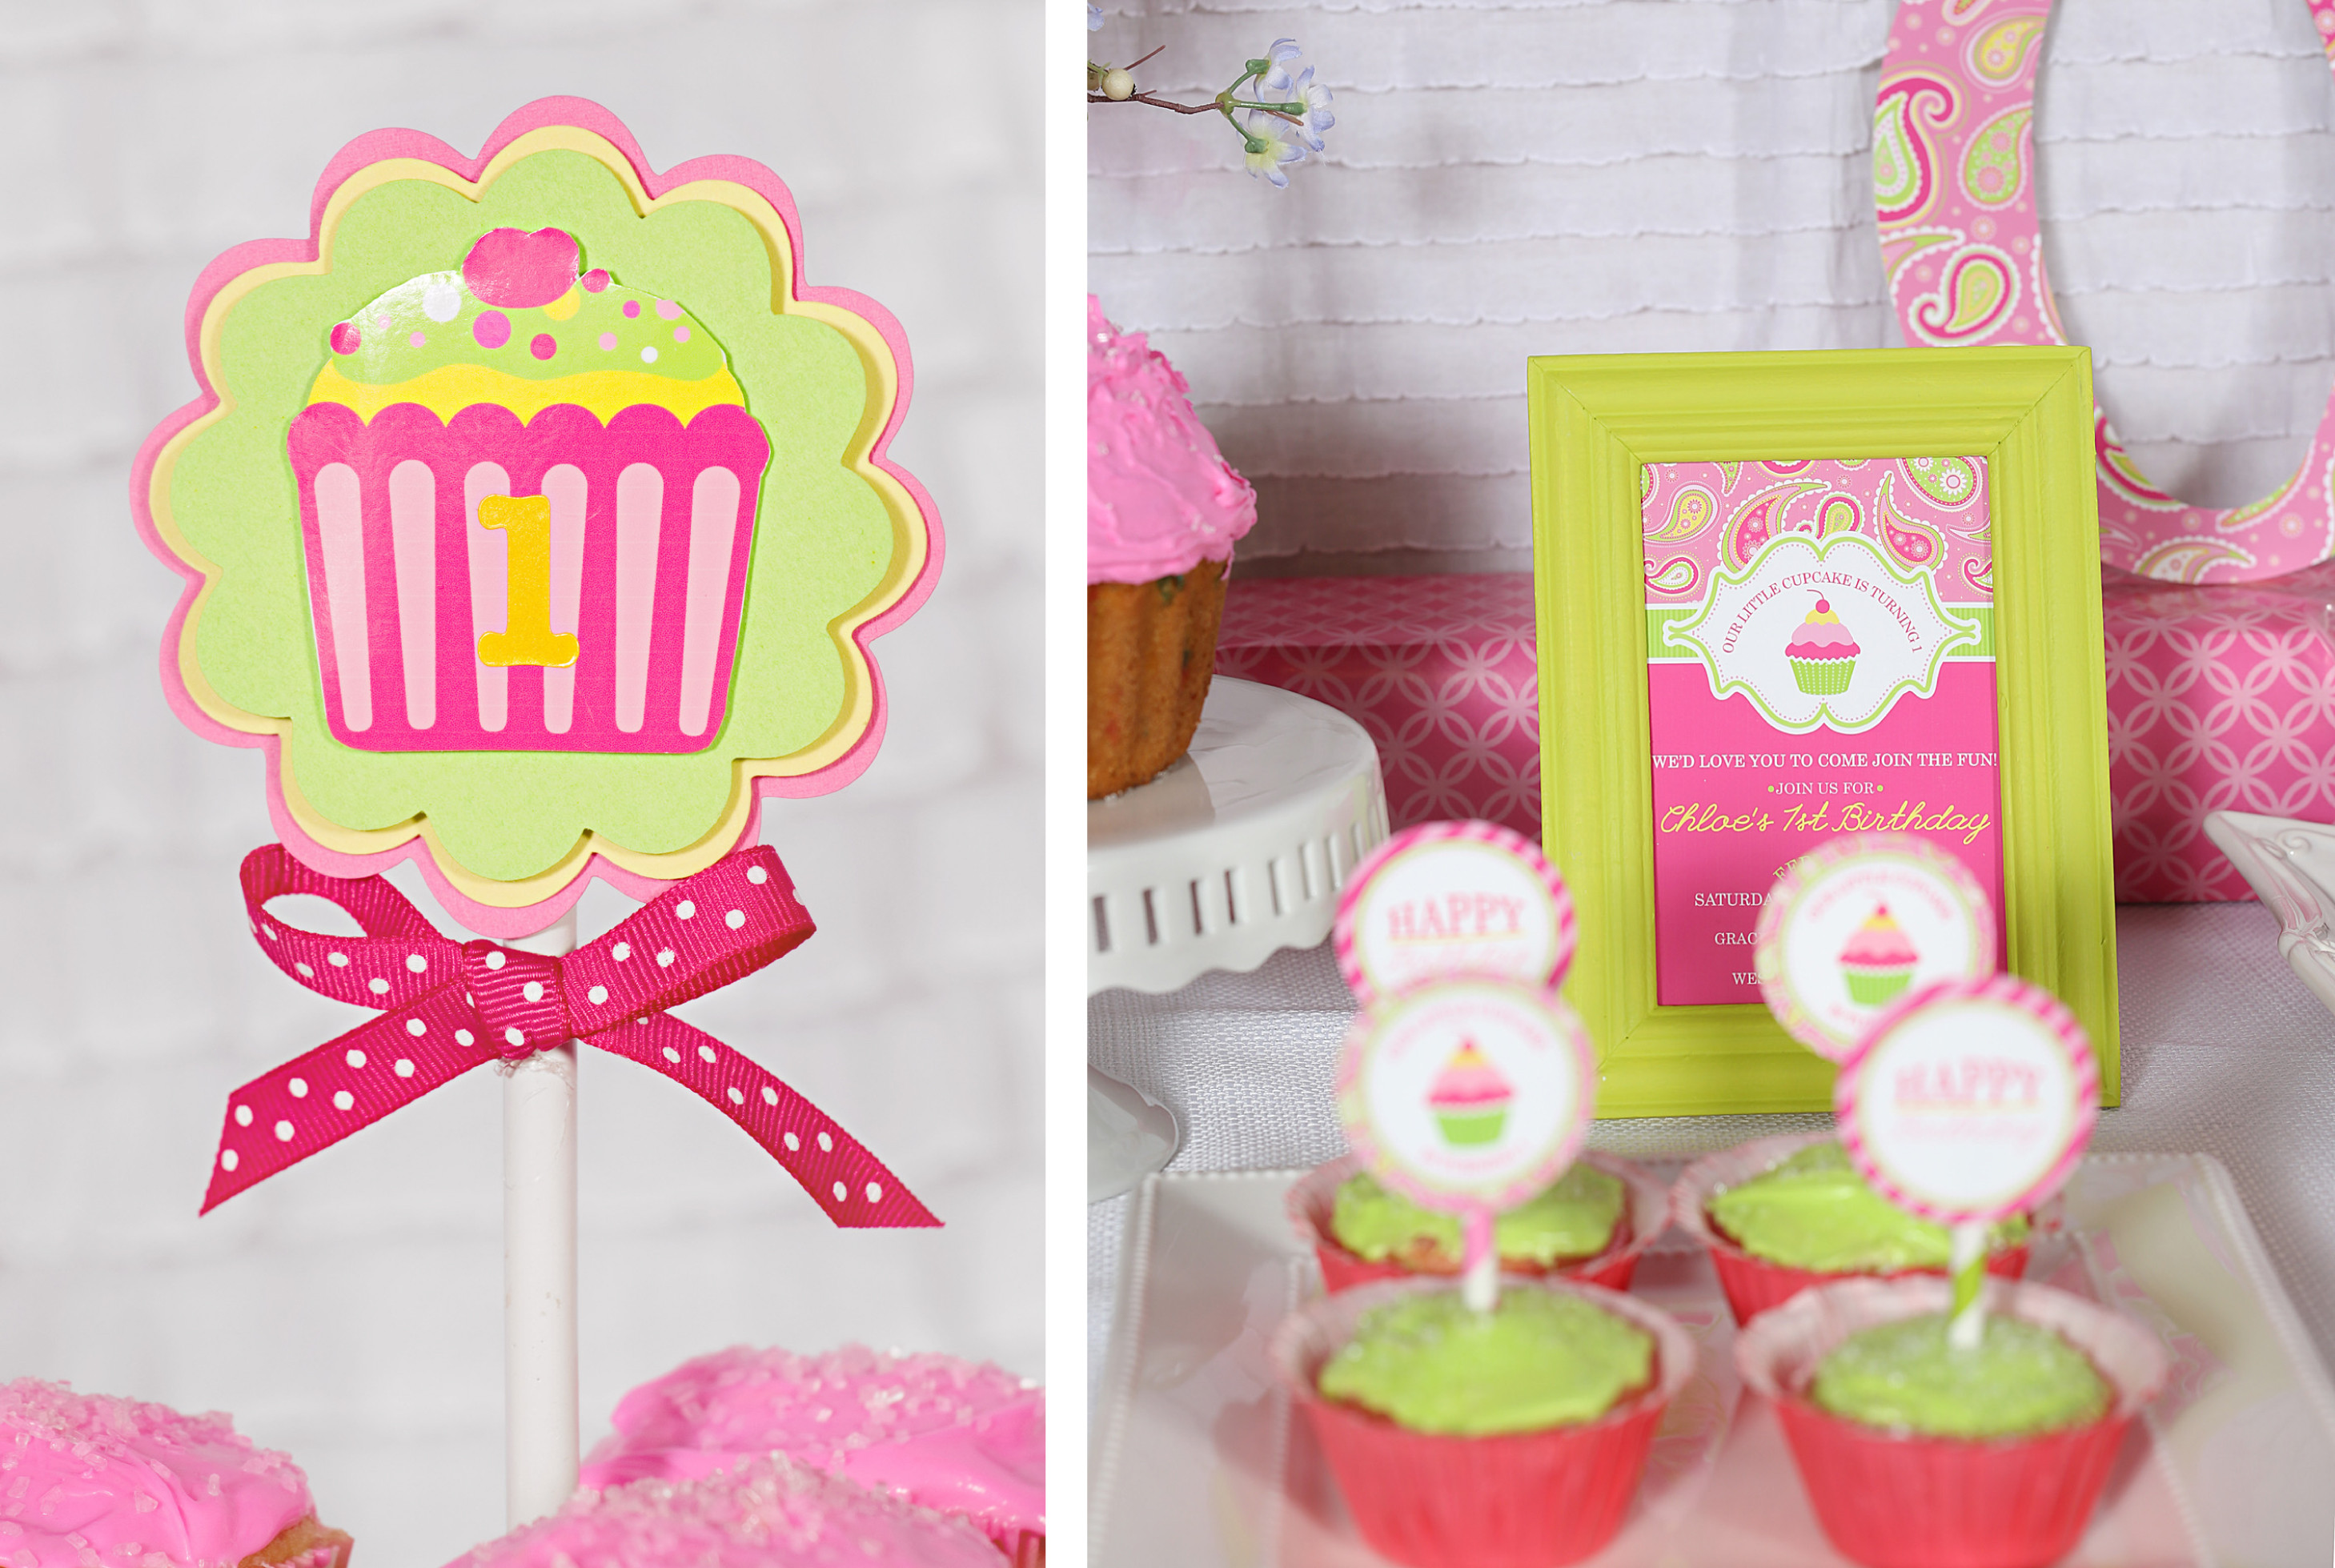 Cupcake Birthday Party Ideas
 A Cupcake Themed 1st Birthday party with Paisley and Polka